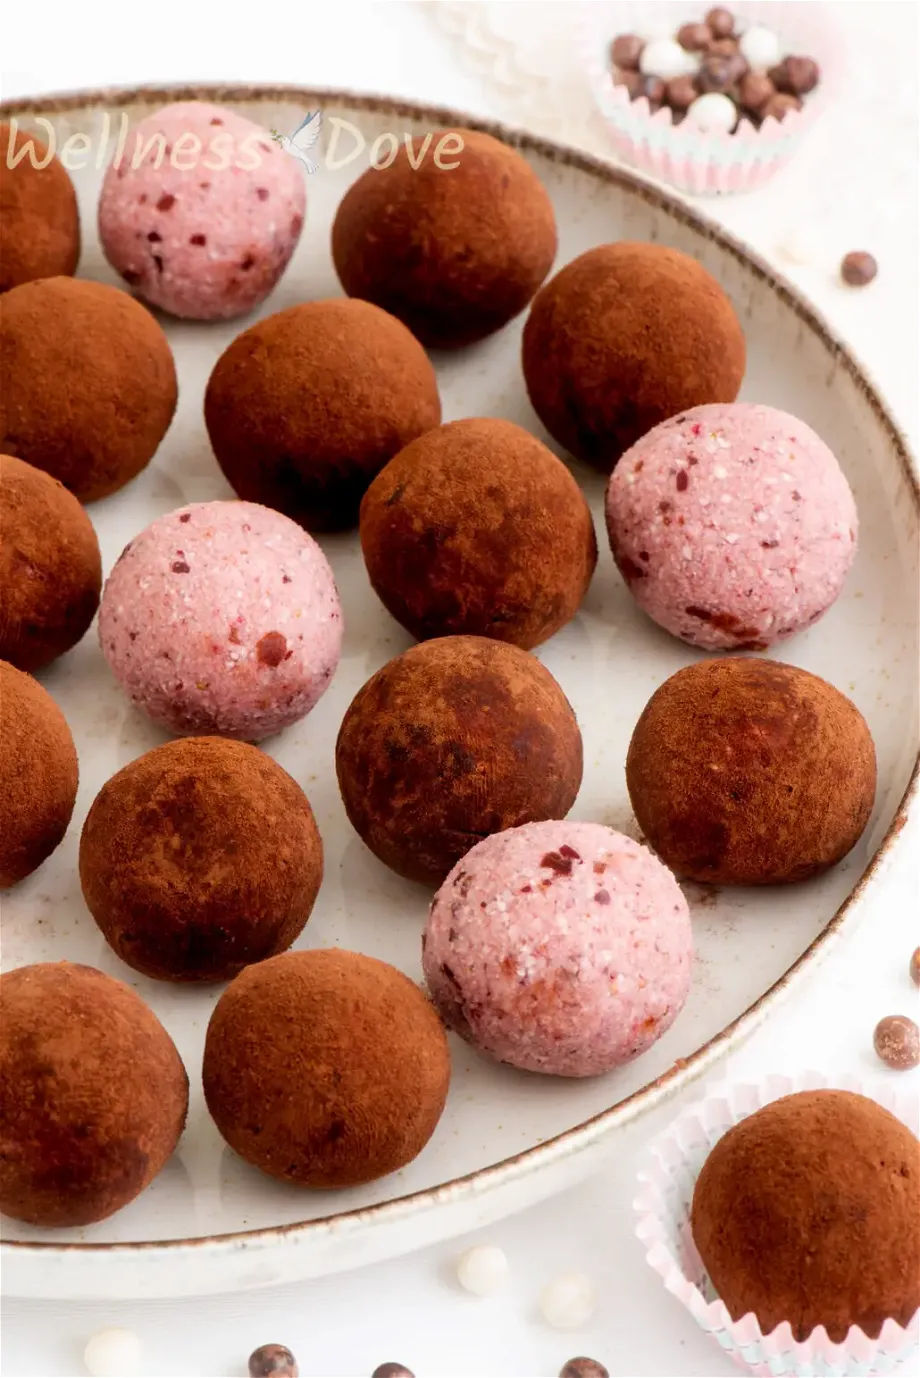 the strawberry vegan truffles in a large plate